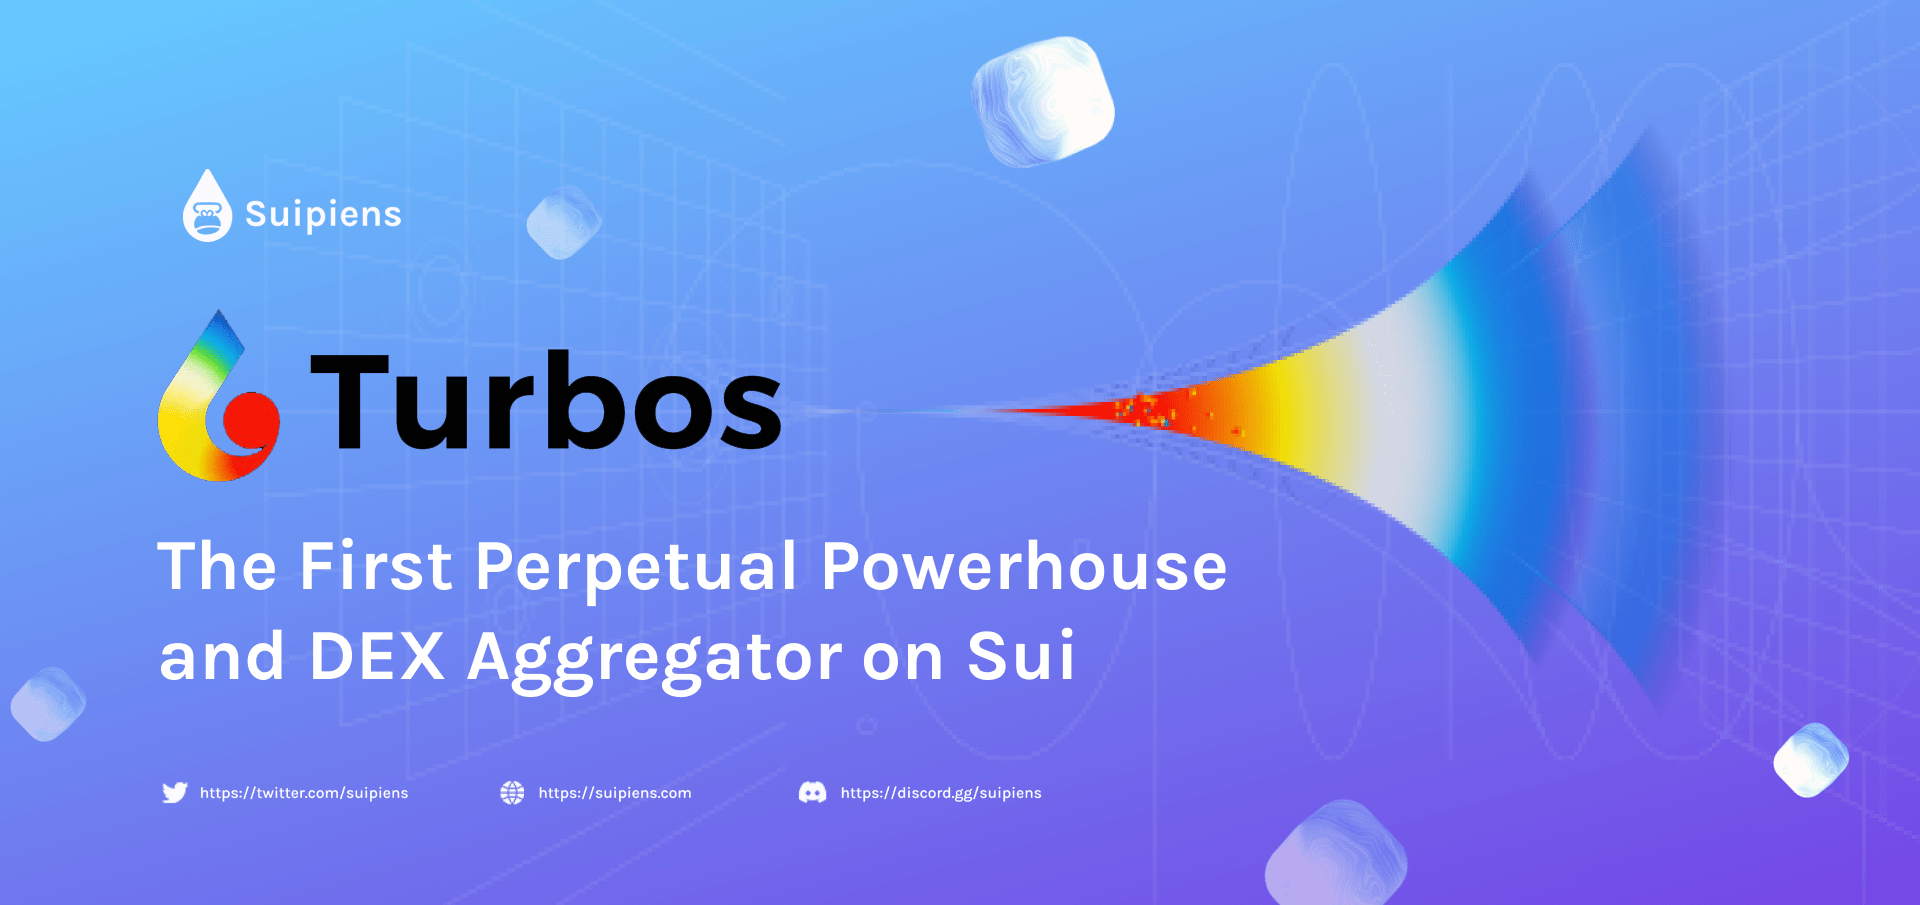 Turbos Finance - The First Perpetual Powerhouse and DEX Aggregator on Sui